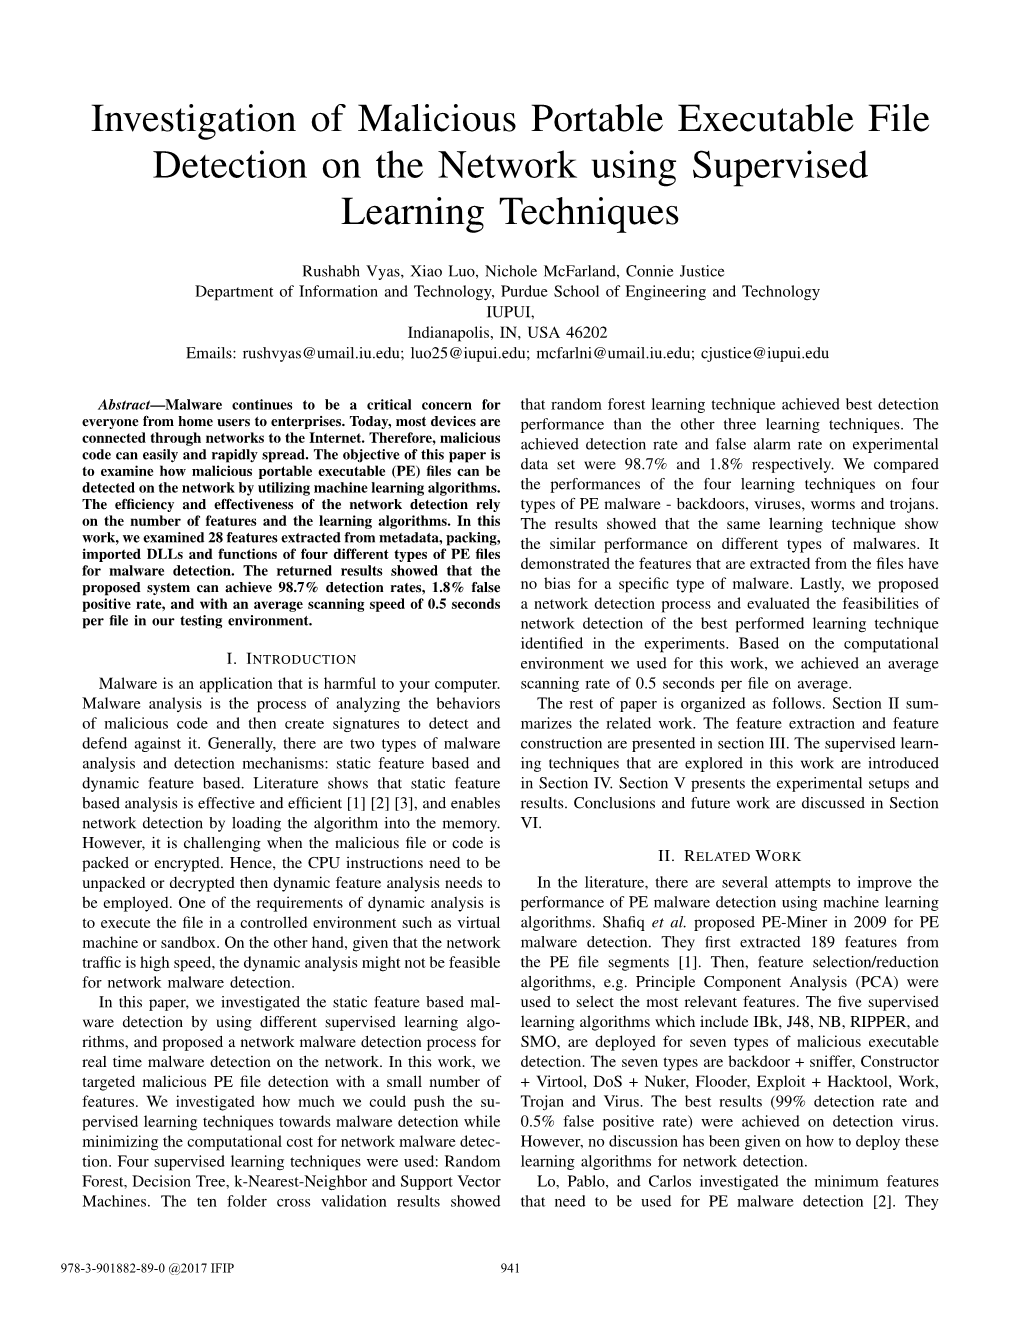 Investigation of Malicious Portable Executable File Detection on the Network Using Supervised Learning Techniques